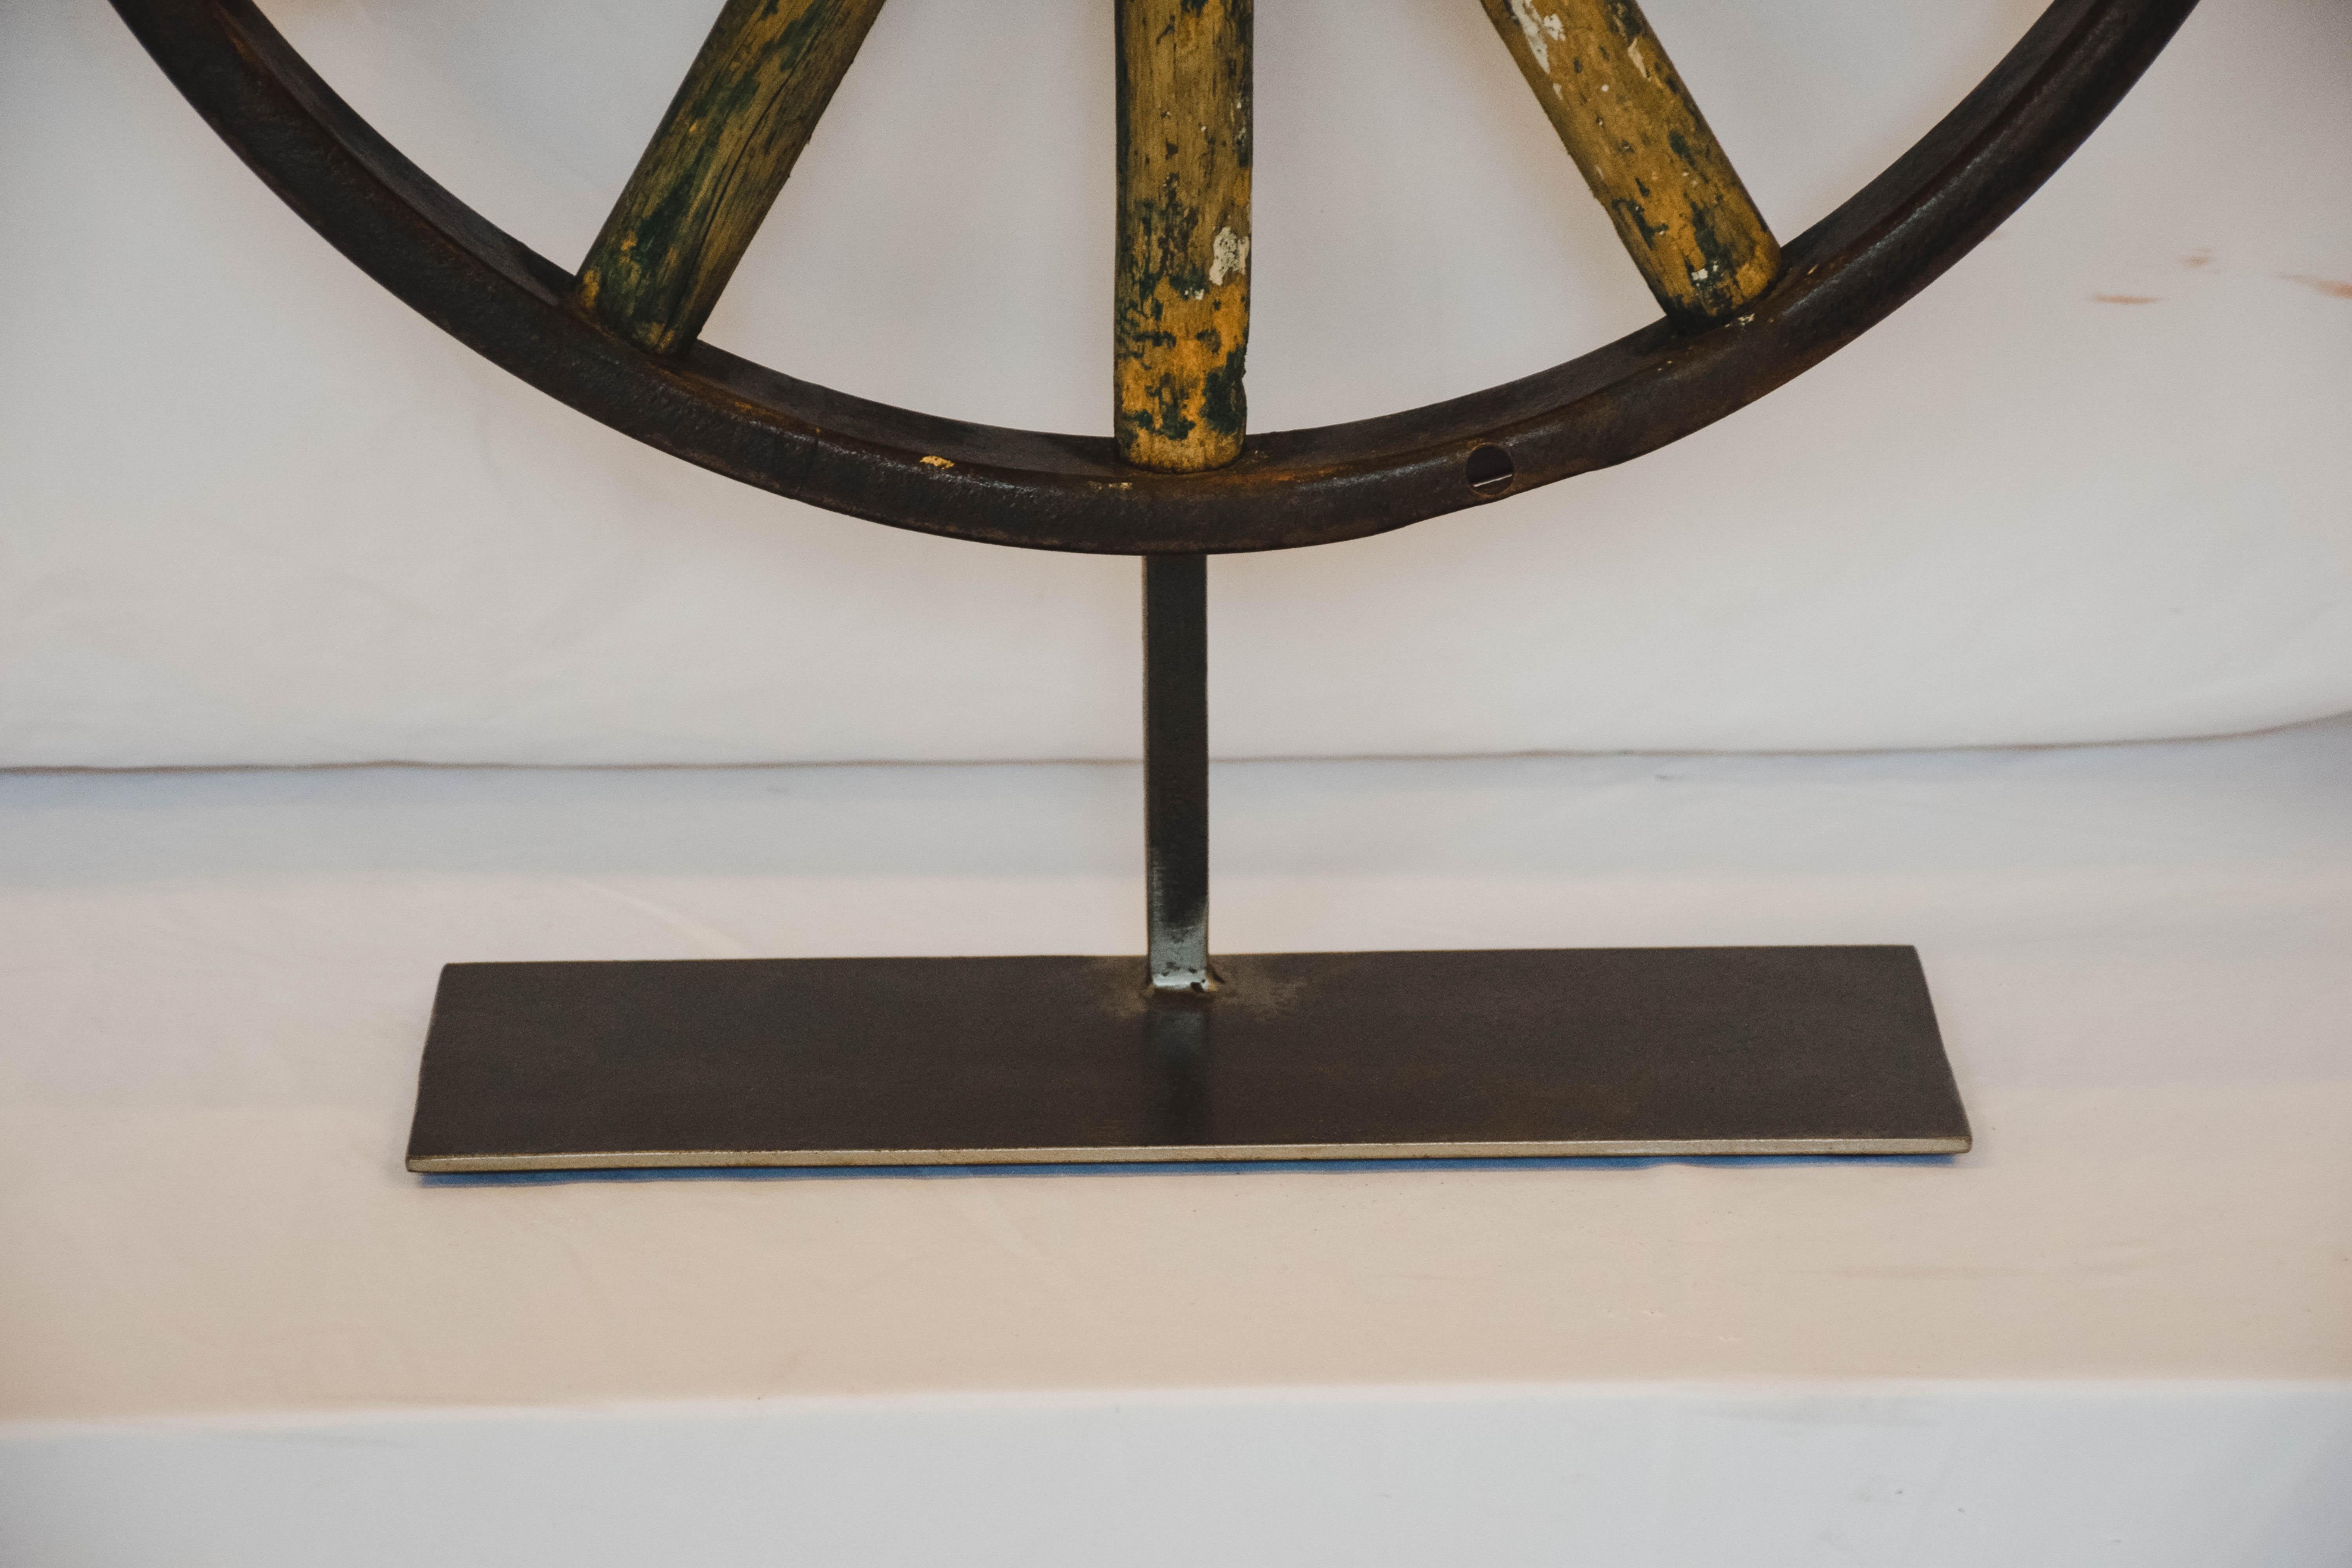 This wagon wheel on an iron stand would be great as an accent or made into a lamp!